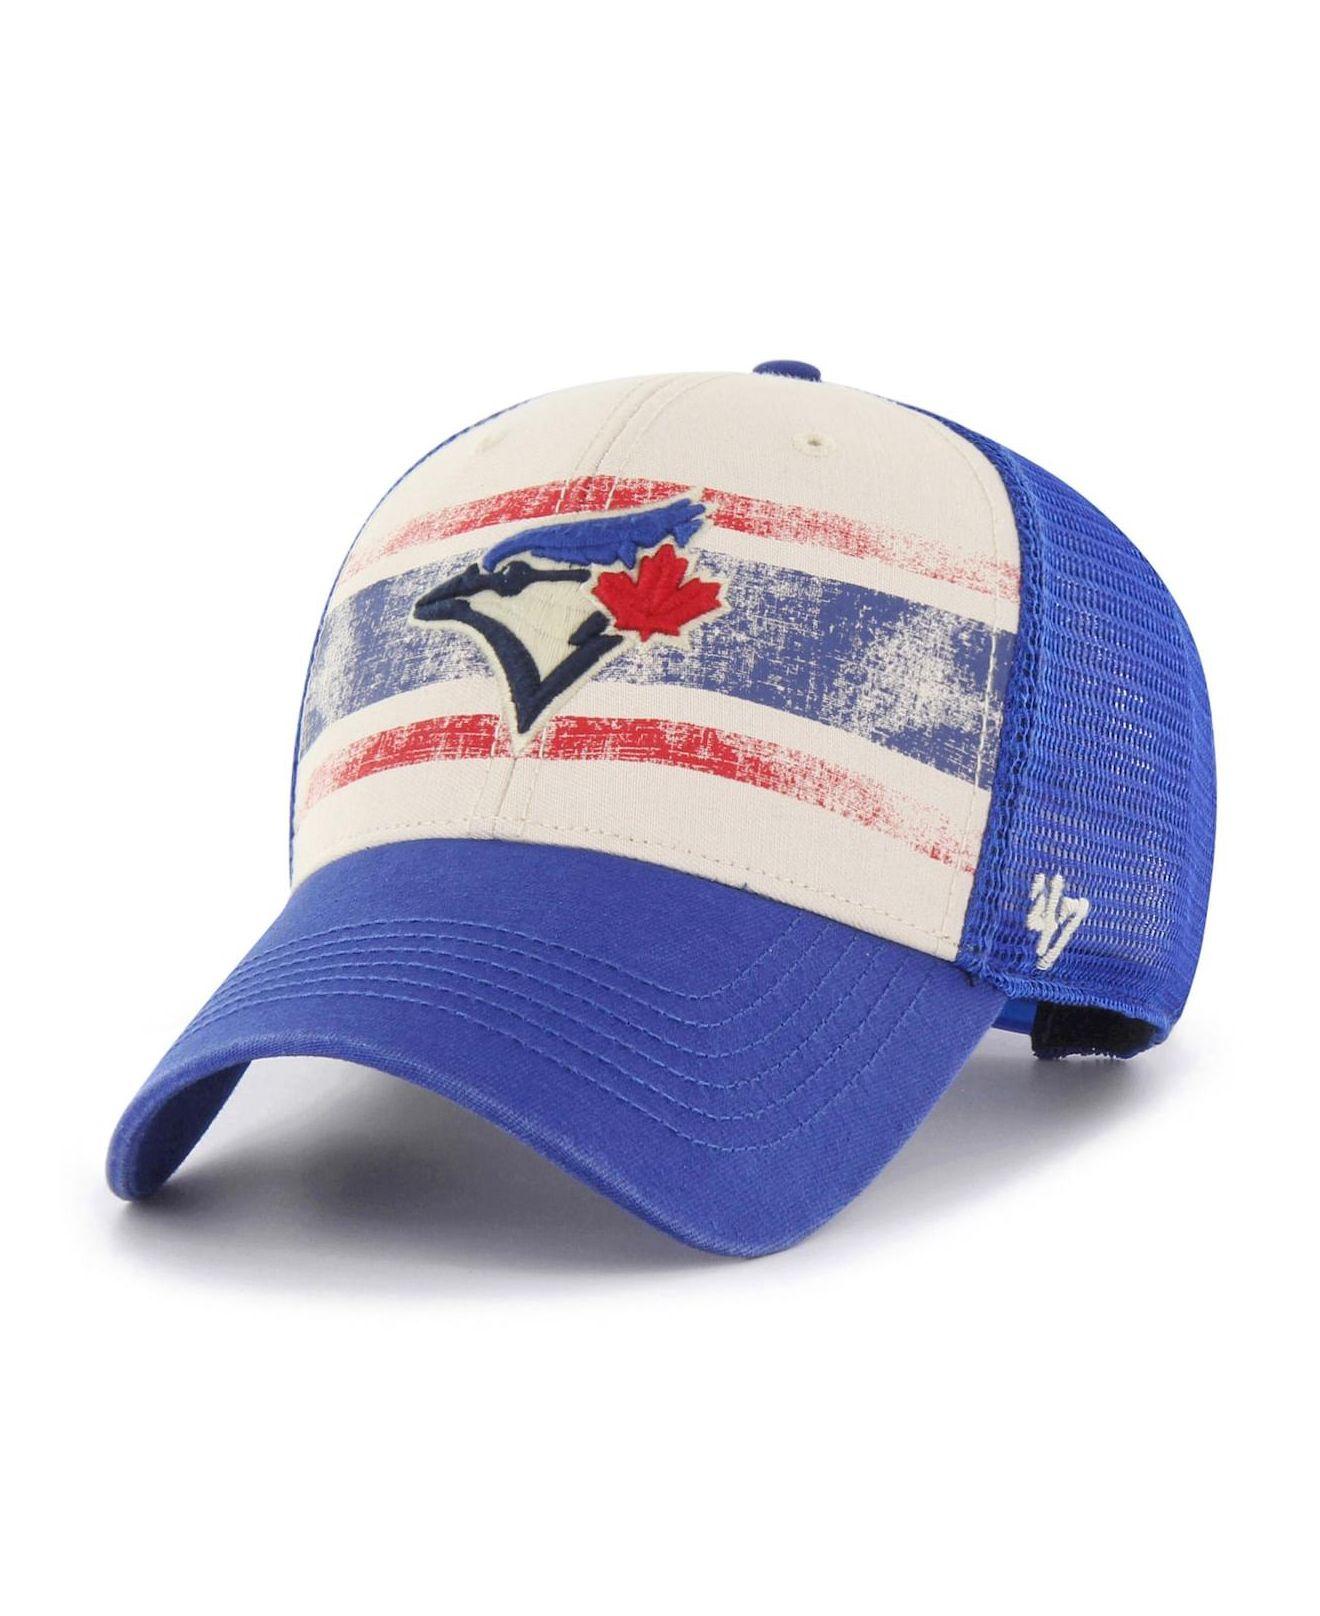 47 Royal Toronto Blue Jays Team Logo Cooperstown Collection Clean Up Adjustable Hat